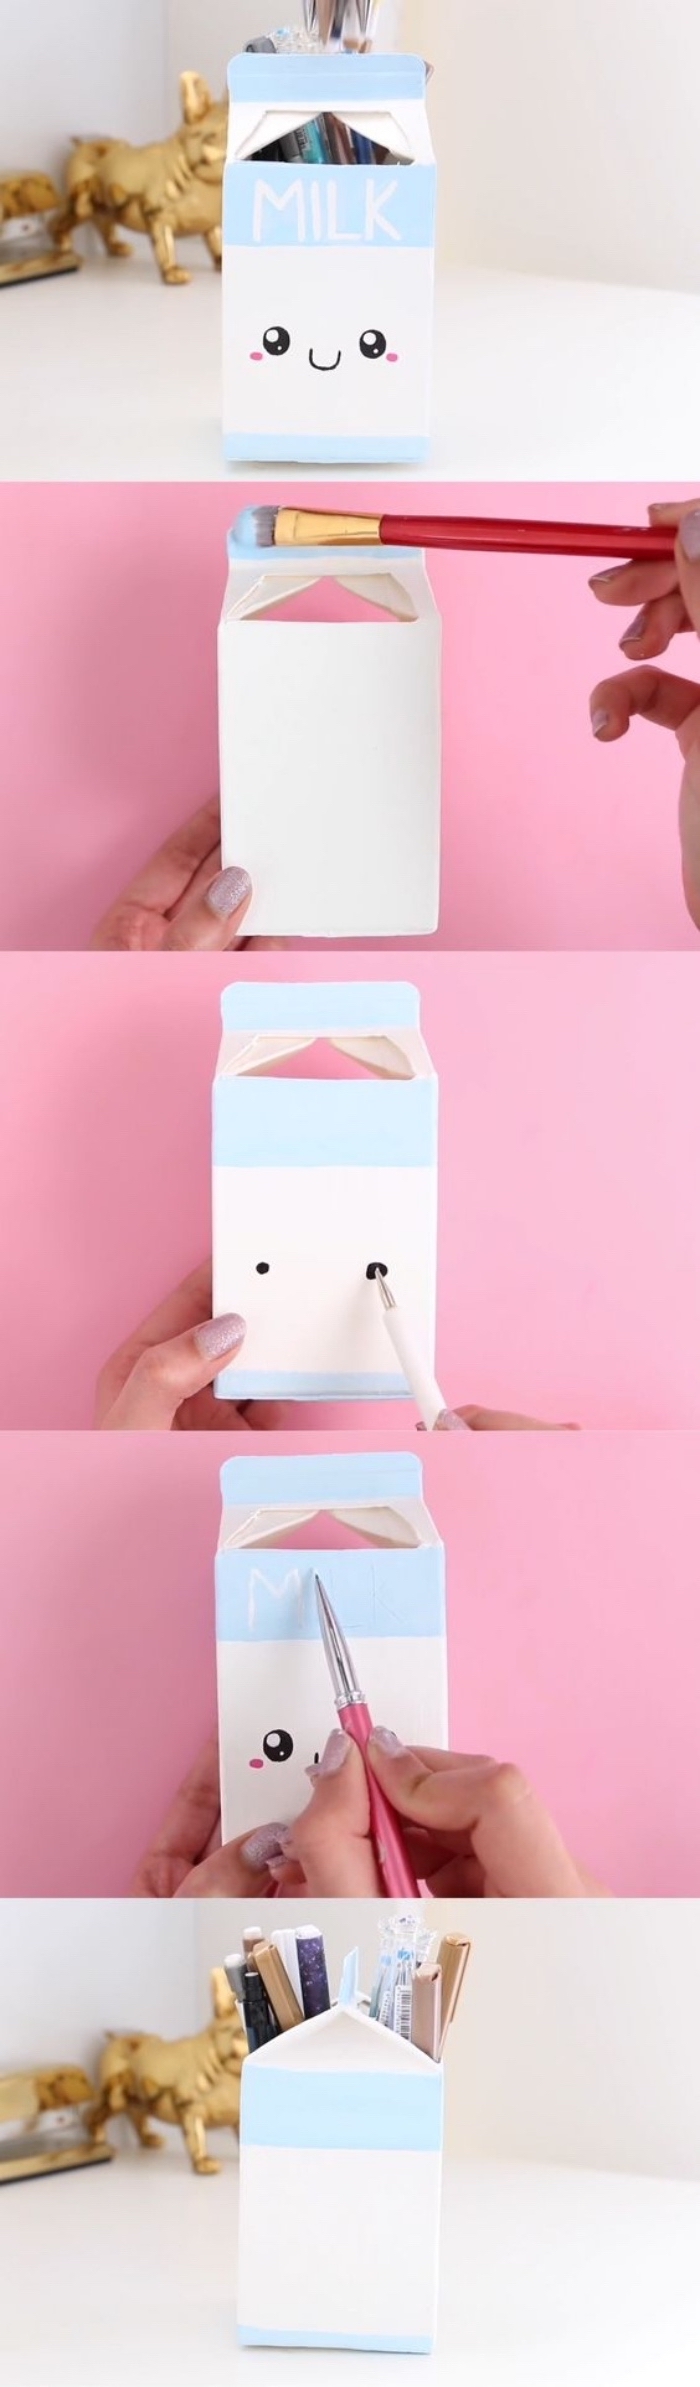 milk carton, turned into a pencil holder, hands on activities, step by step, diy tutorial